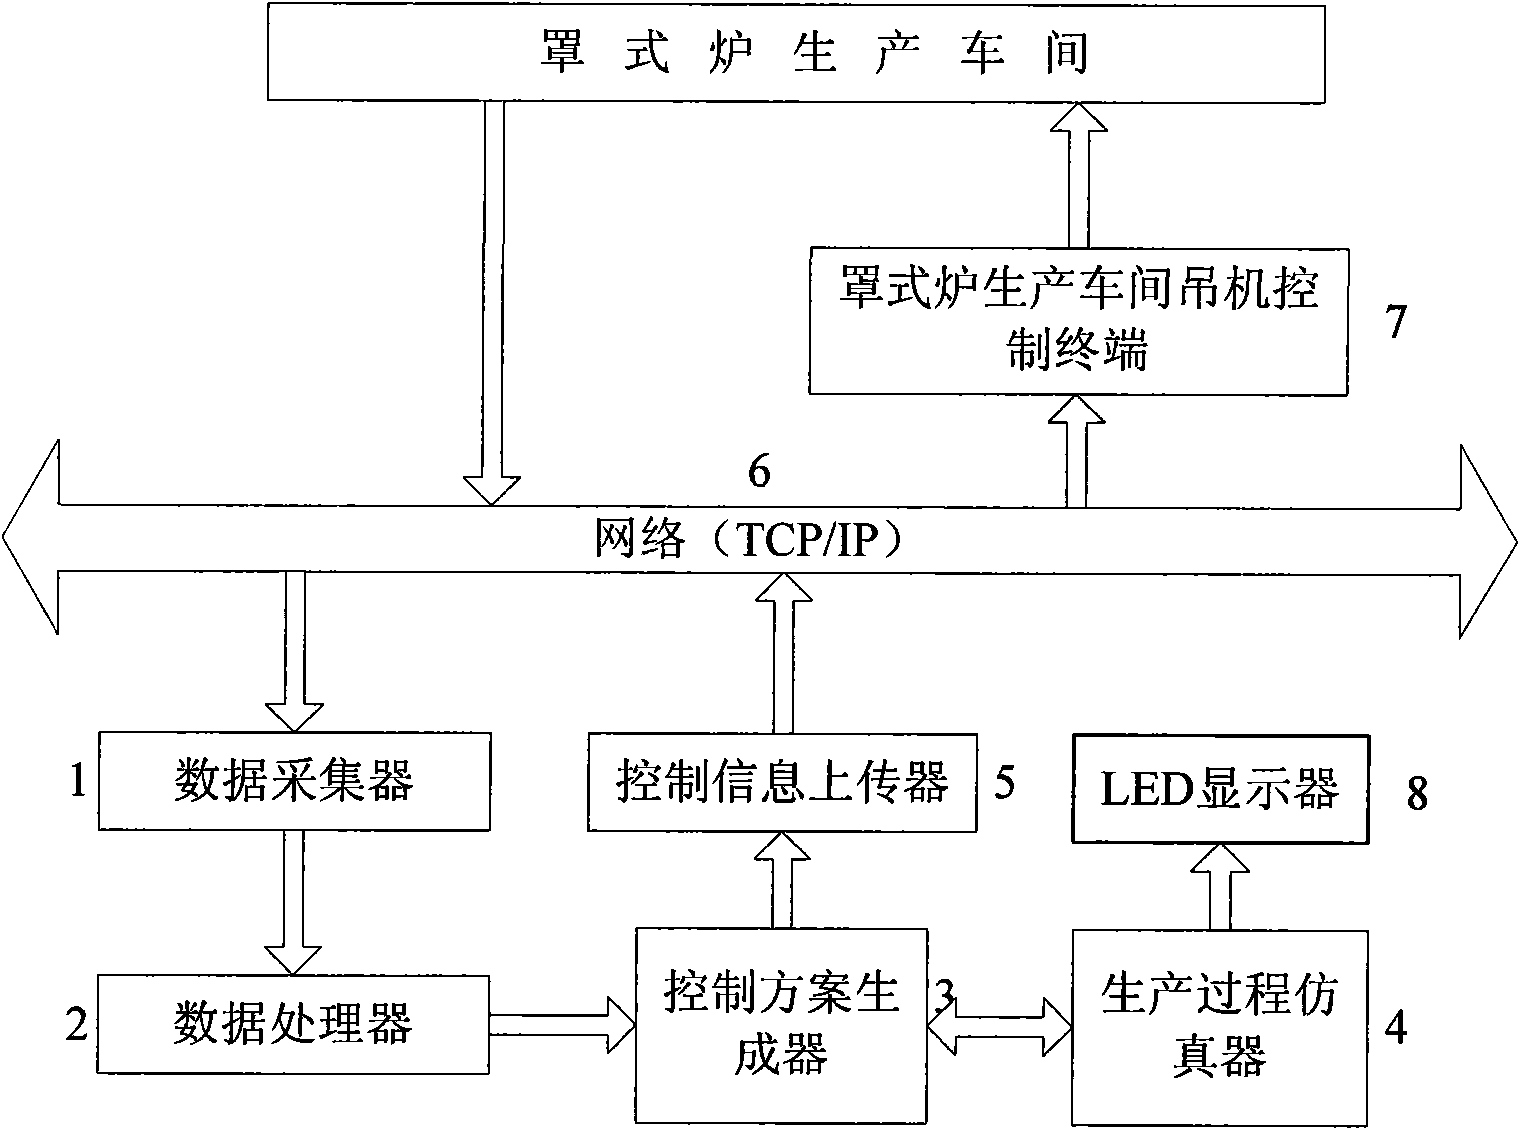 Method and device for improving operating efficiency of material handling equipment of bell type furnace units of steel enterprises